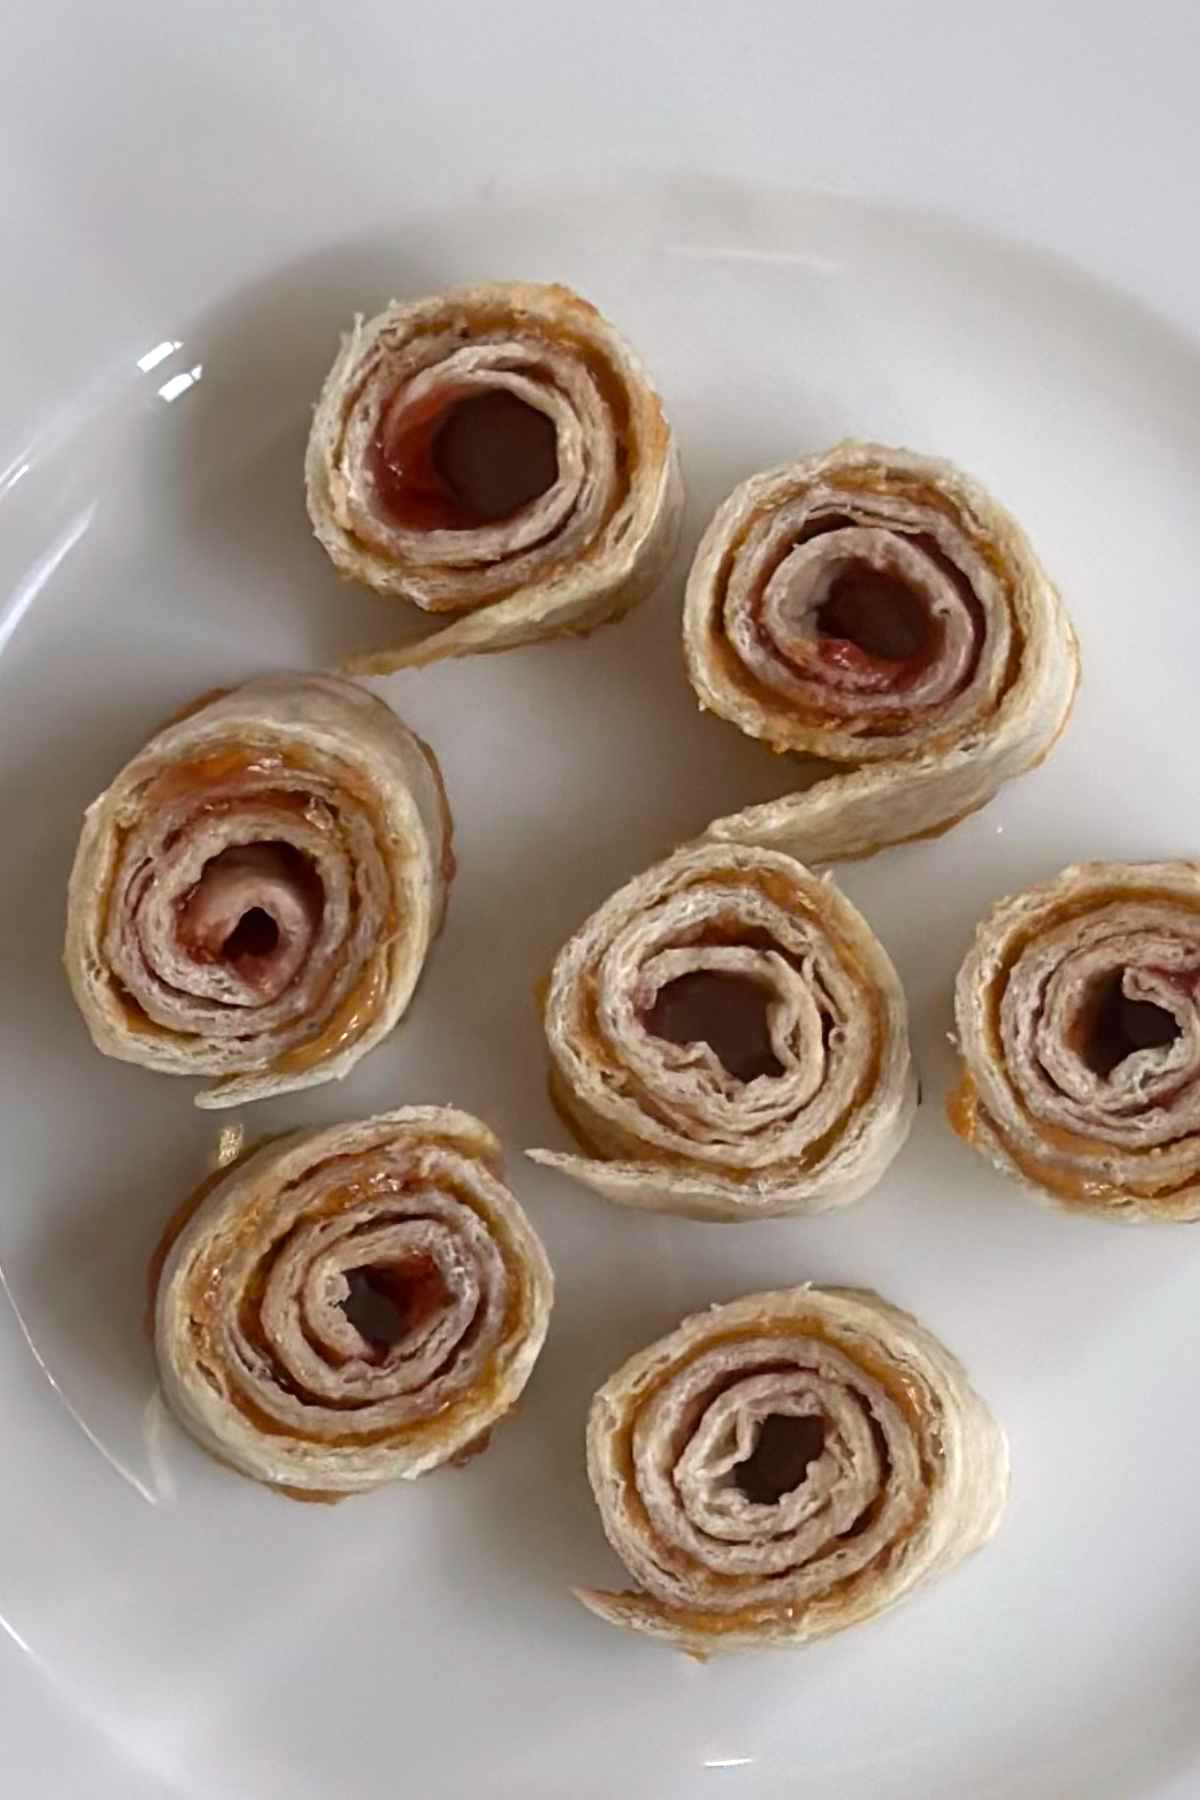 Flour Tortilla and Jelly pinwheels are loaded with sweet jam and smooth peanut butter, and wrapped in flour tortillas. It’s a super easy snack to make. Tuck them into lunch boxes or have them ready to enjoy as a quick snack when the kids come home from school.